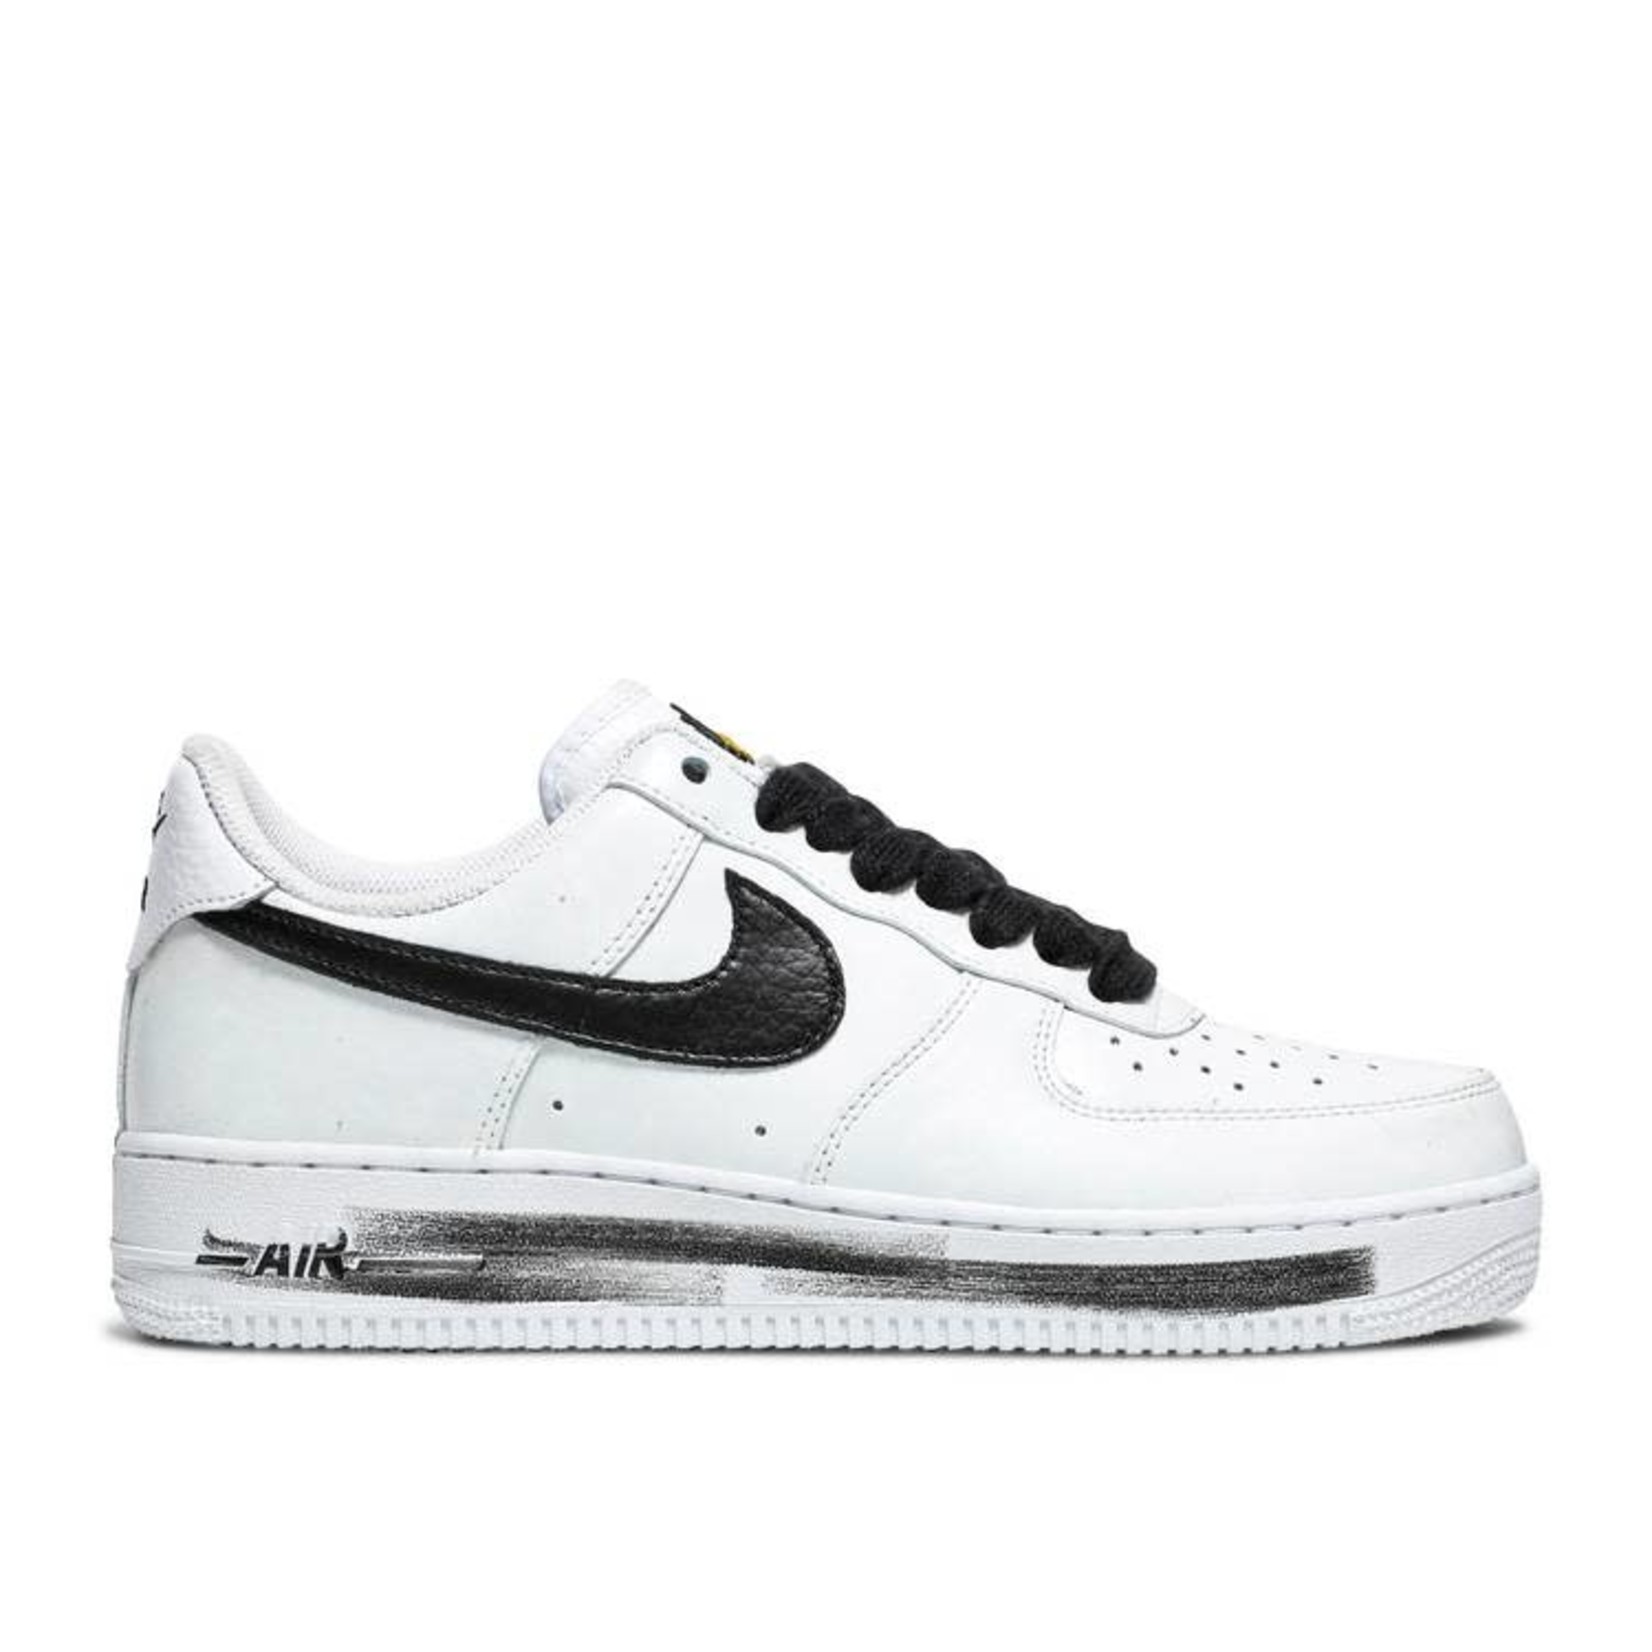 Nike Nike Air Force 1 Low G-Dragon Peaceminusone Para-Noise 2.0 Size 10, DS BRAND NEW